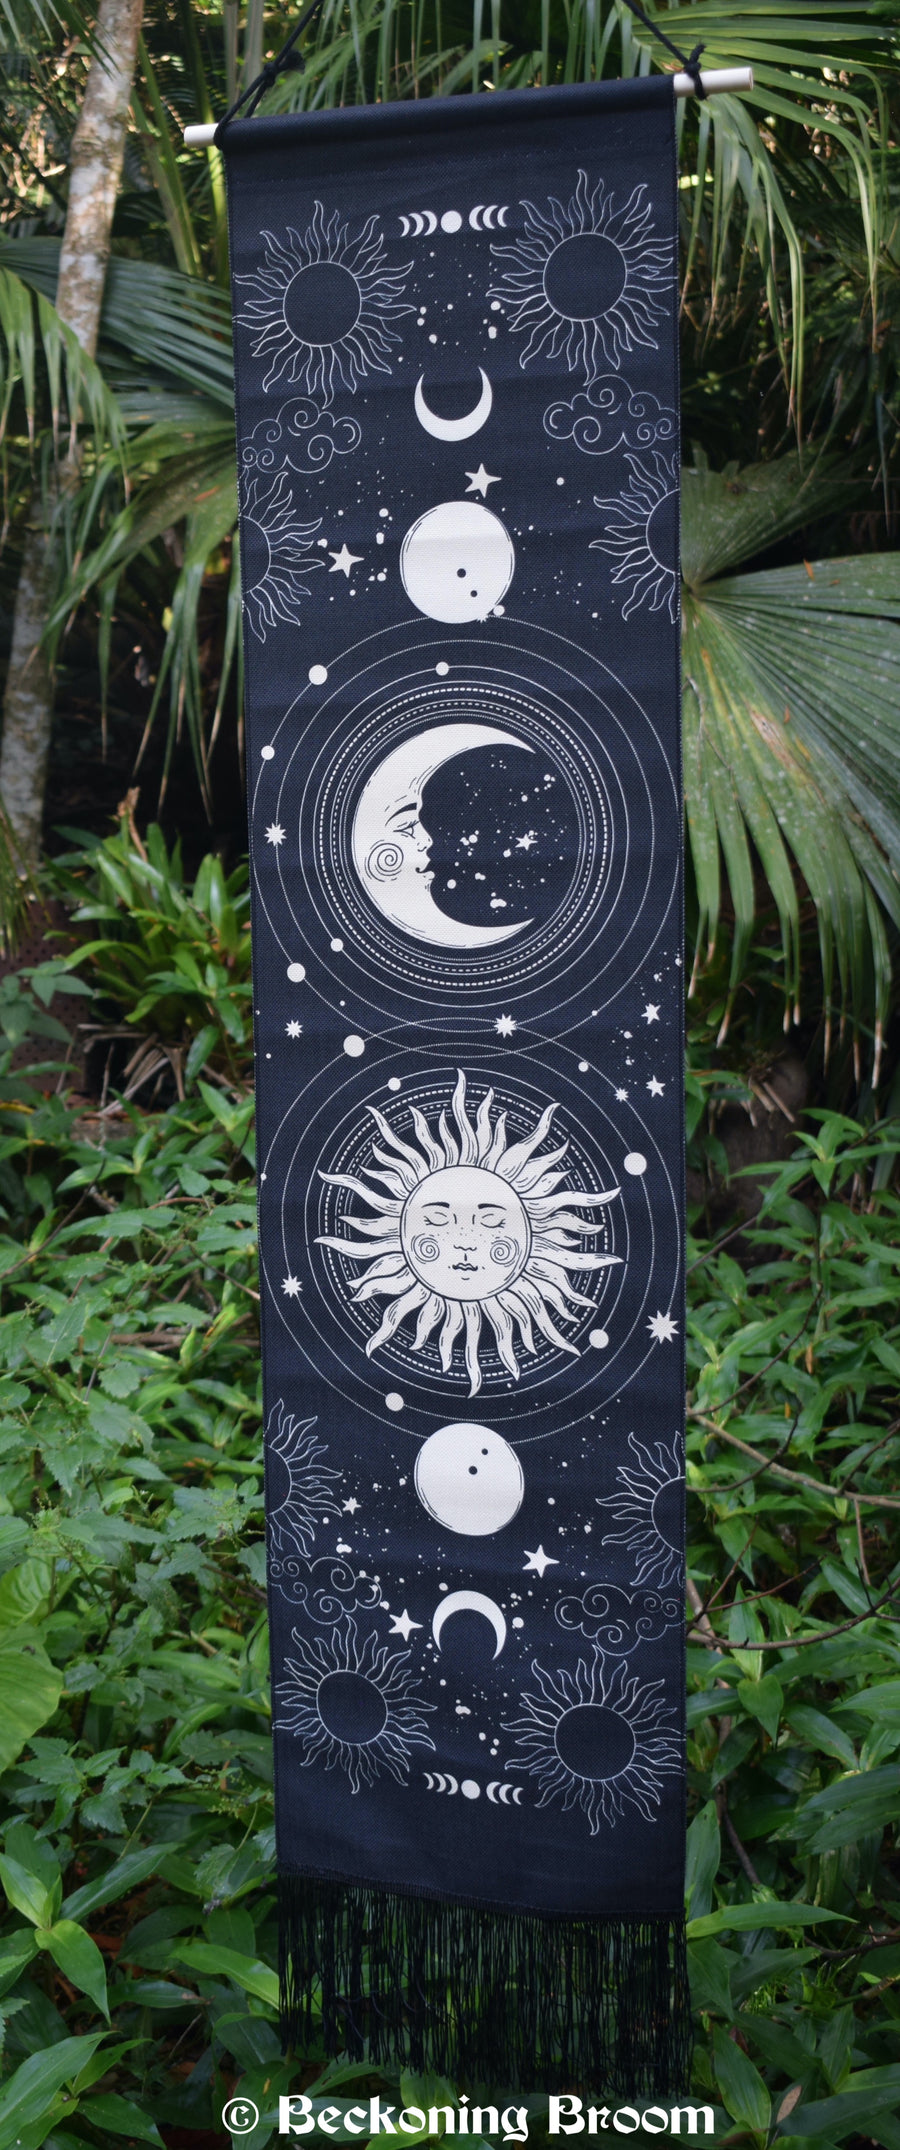 A black fabric tapestry depicting white moons and a sun with a long black fringe hangs with greenery in the background.